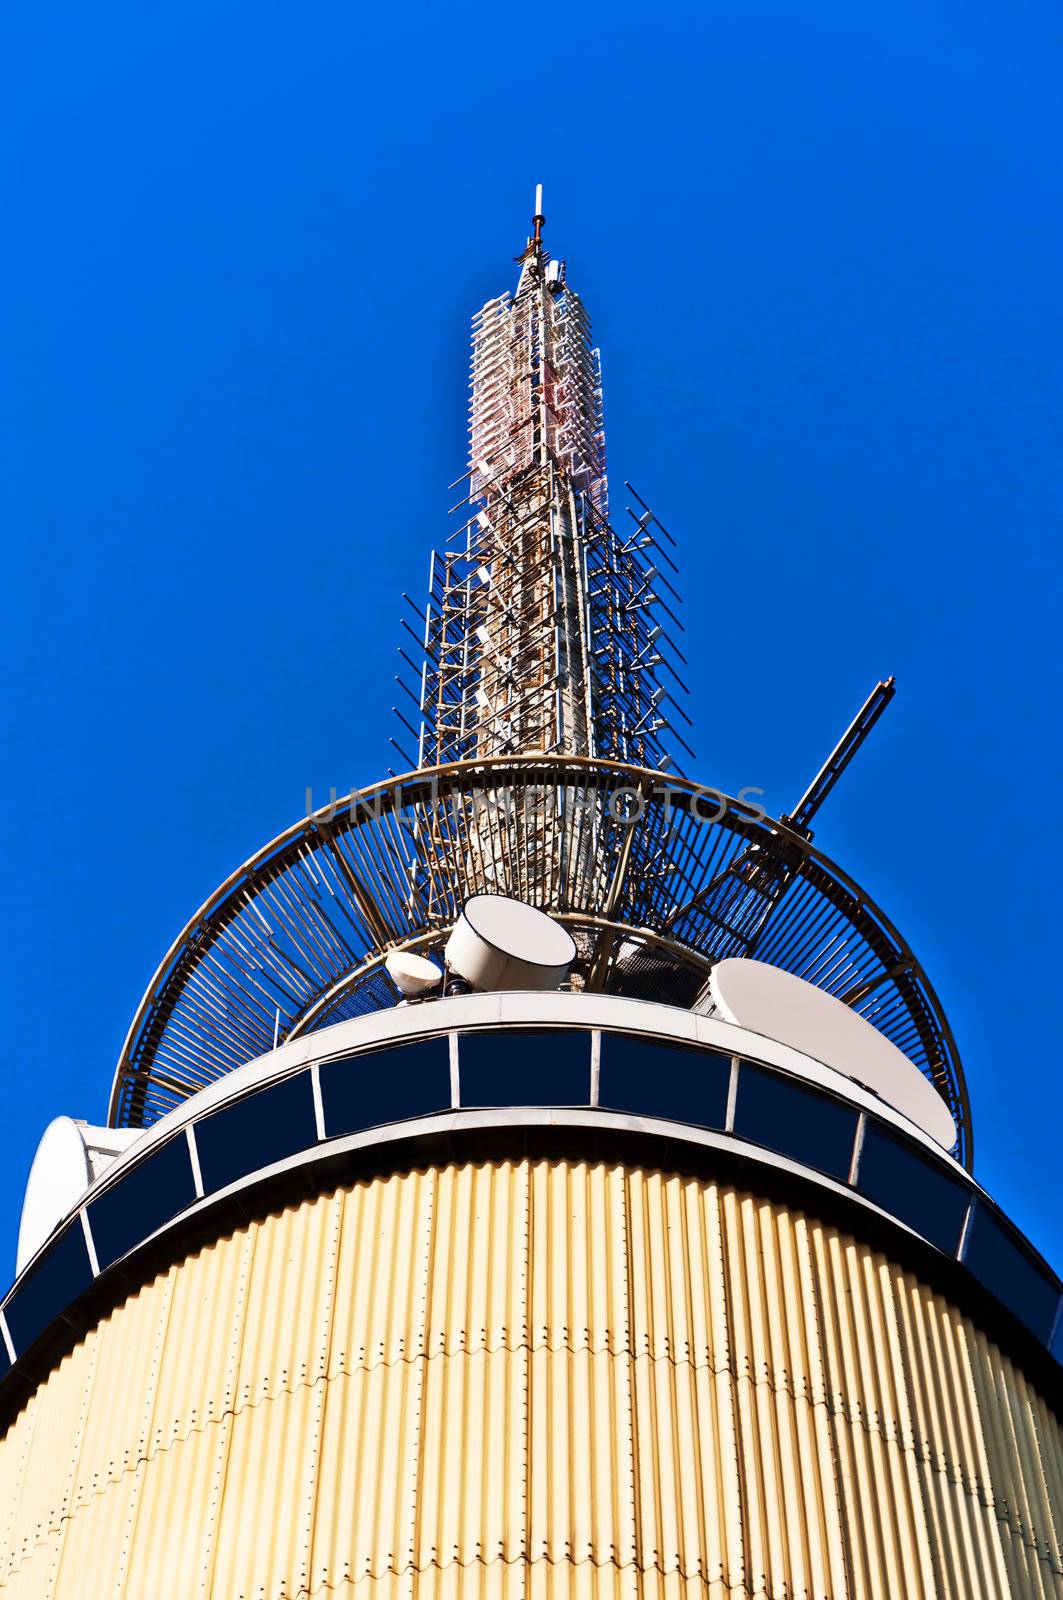 Telecom tower with microwave links and cellular network antennas on blue sky Oslo Norway